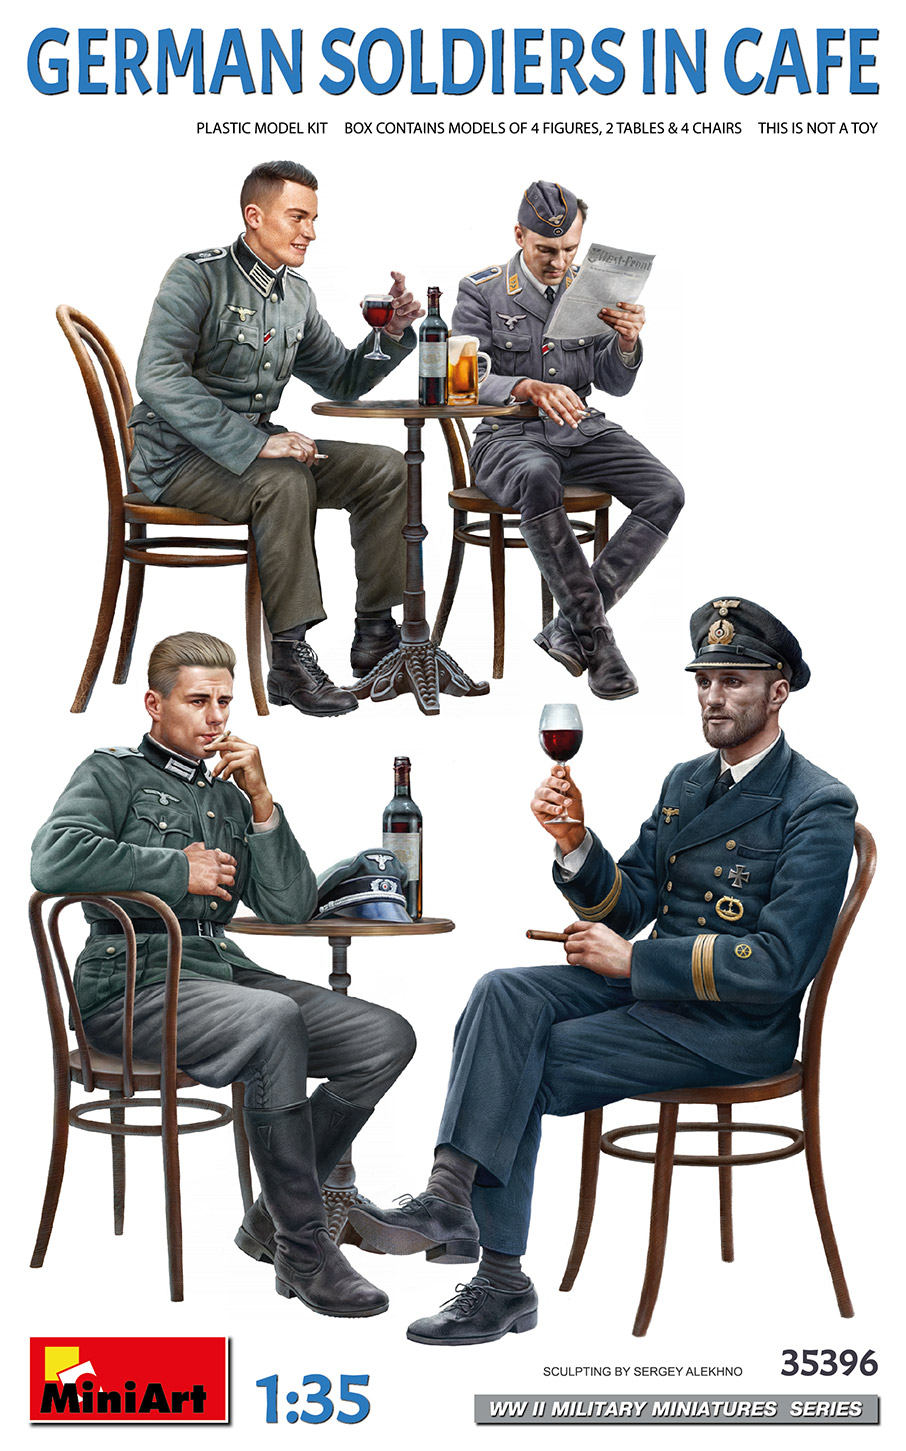 MiniArt’s German Soldiers in Cafe